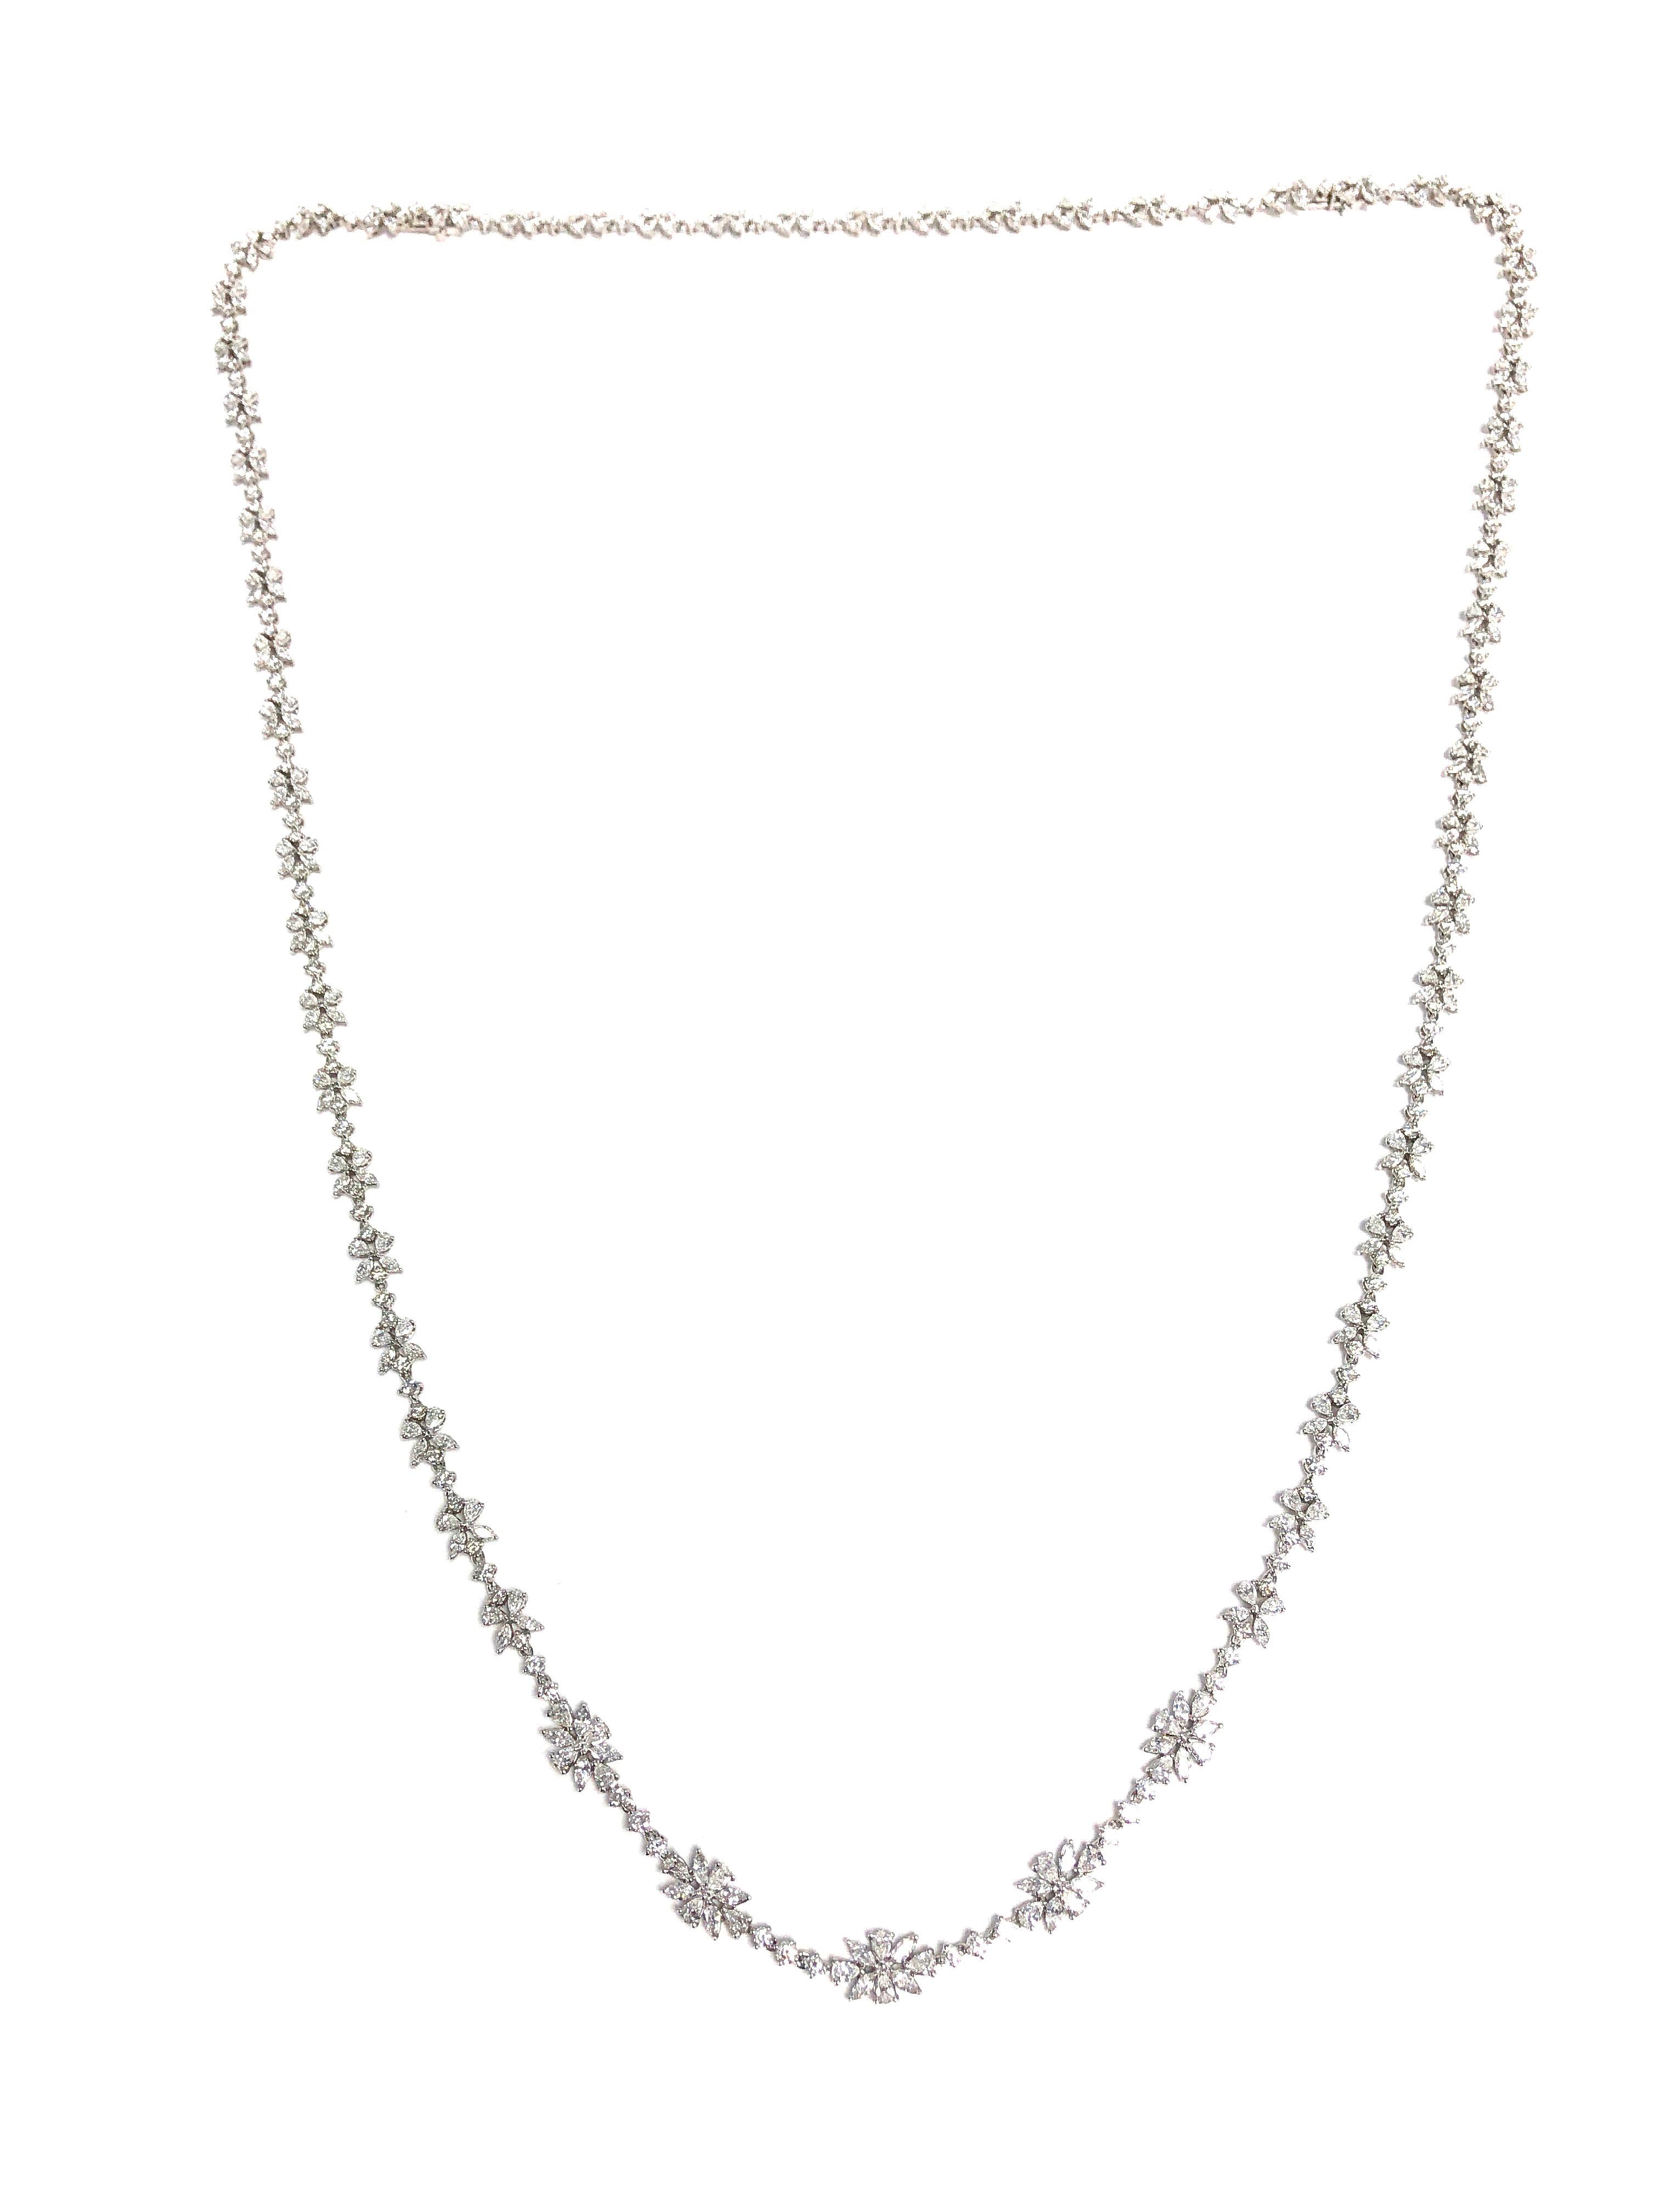 This stunning necklace features a combination of marquise, pear, and round white diamonds to form a beautiful endless flower design. This necklace is secured with a hidden clasp and safety lock, and is set in 18k white gold. 

This necklace is 37